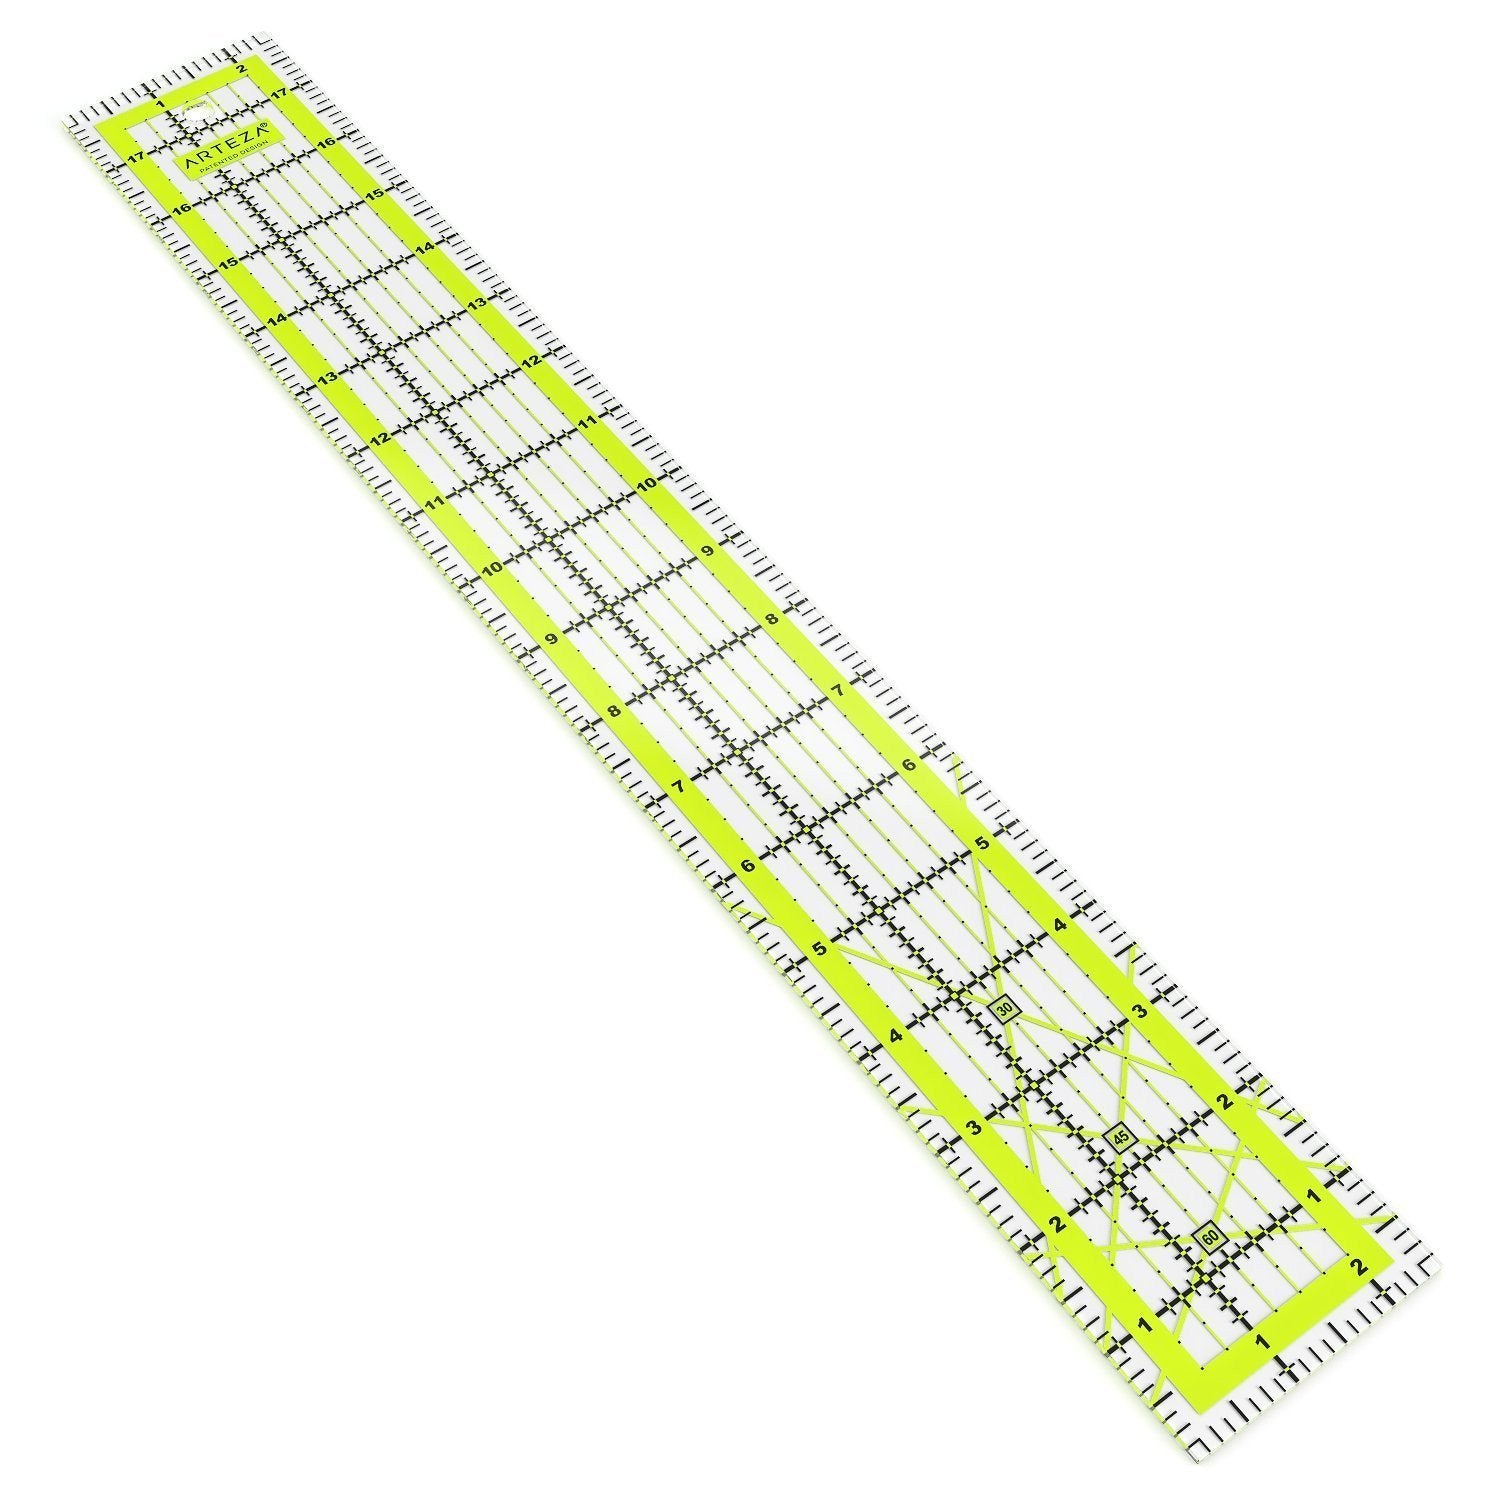  Arteza Quilting Rulers Set of 4 - Double-Colored Acrylic Sewing  Ruler (4.5x4.5, 6x6, 9.5x9.5, 12.5x12.5) with Non-Slip Rings, Sewing  & Quilting Supplies